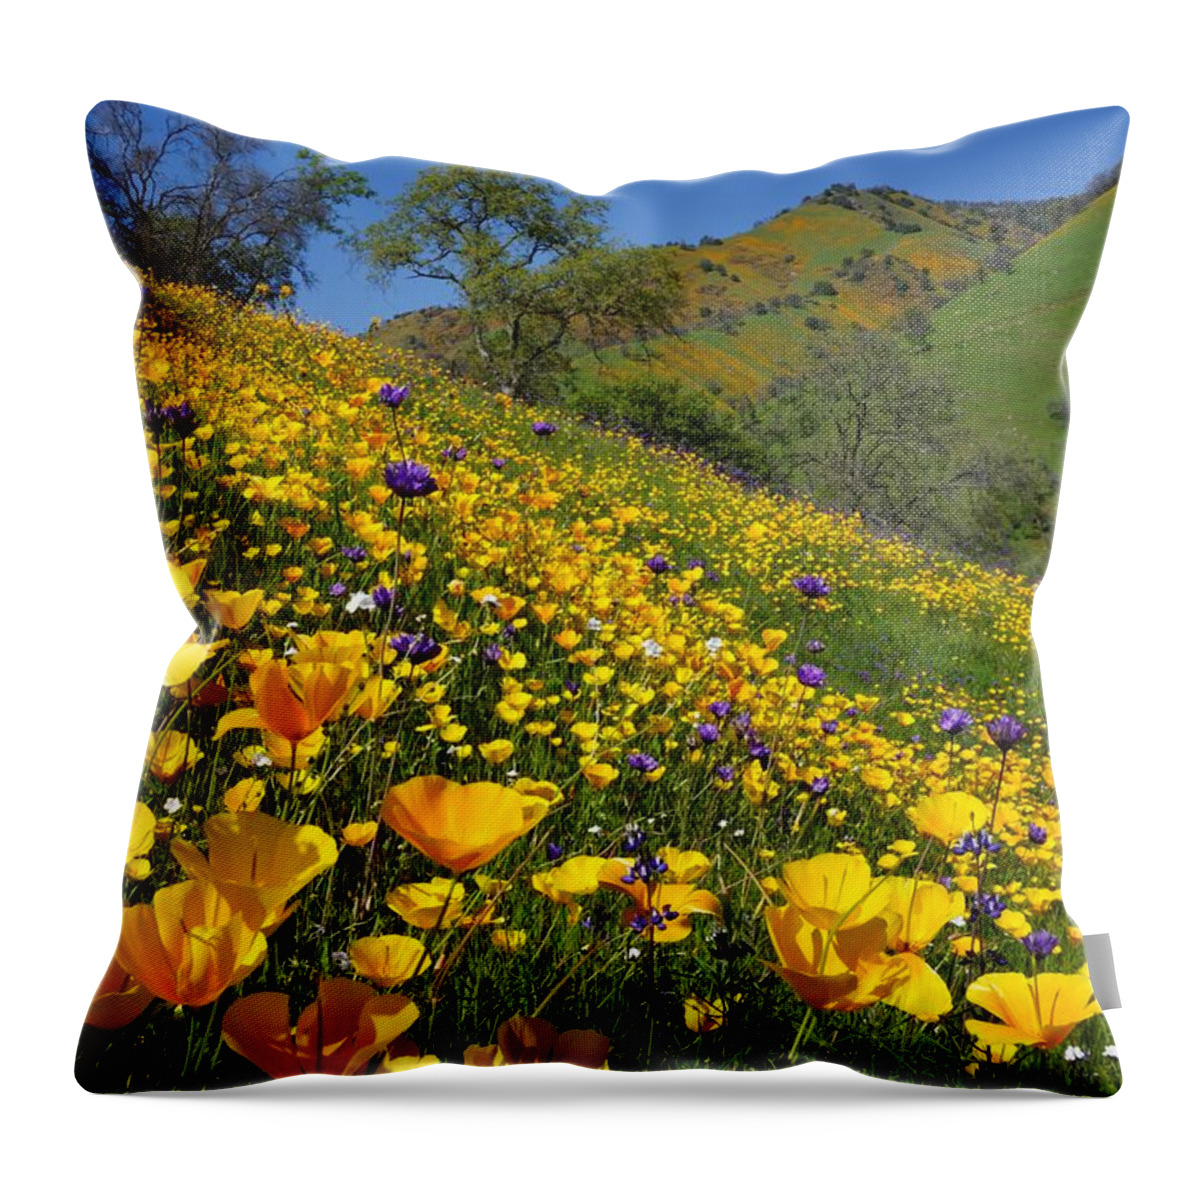 Poppies Throw Pillow featuring the photograph Poppies Sierra Foothills by Brett Harvey